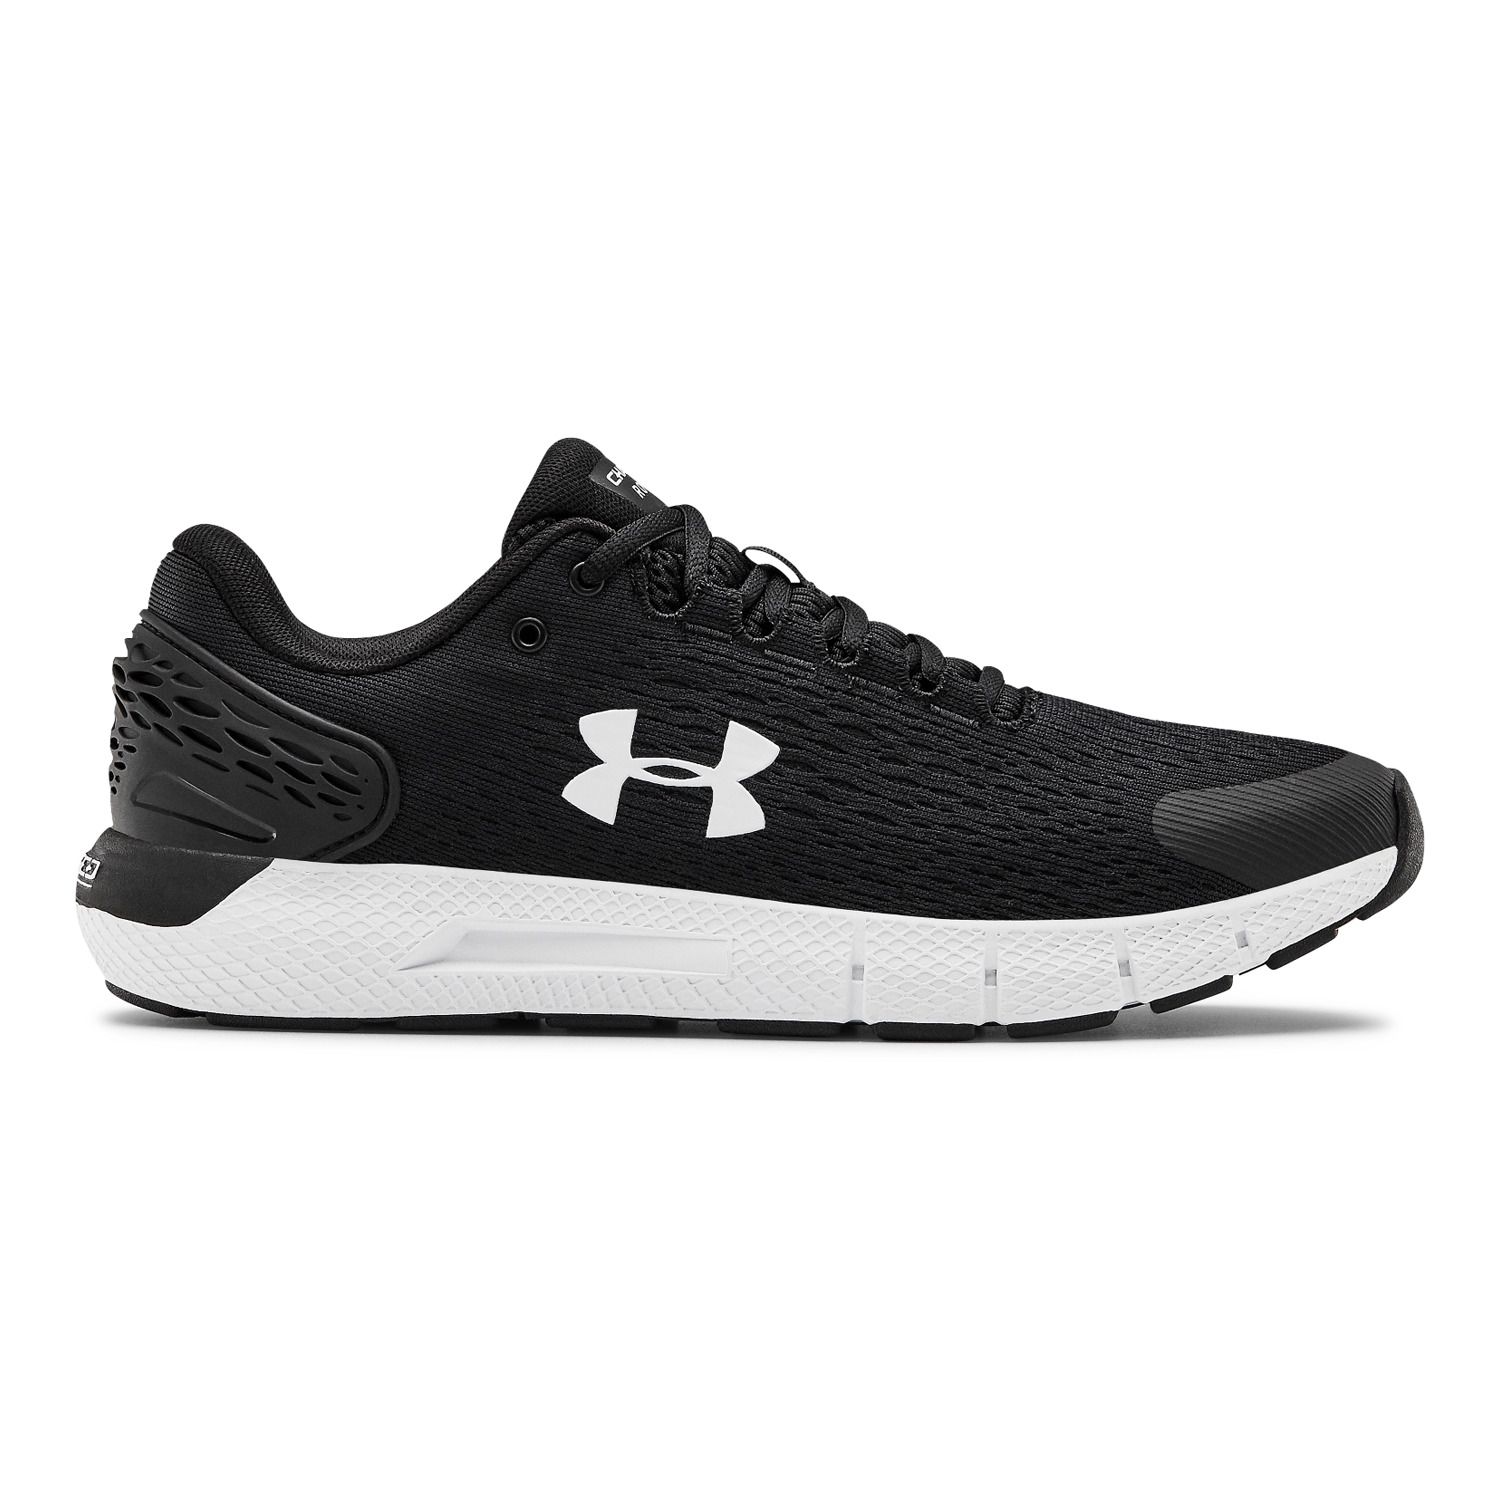 under armor girls shoes